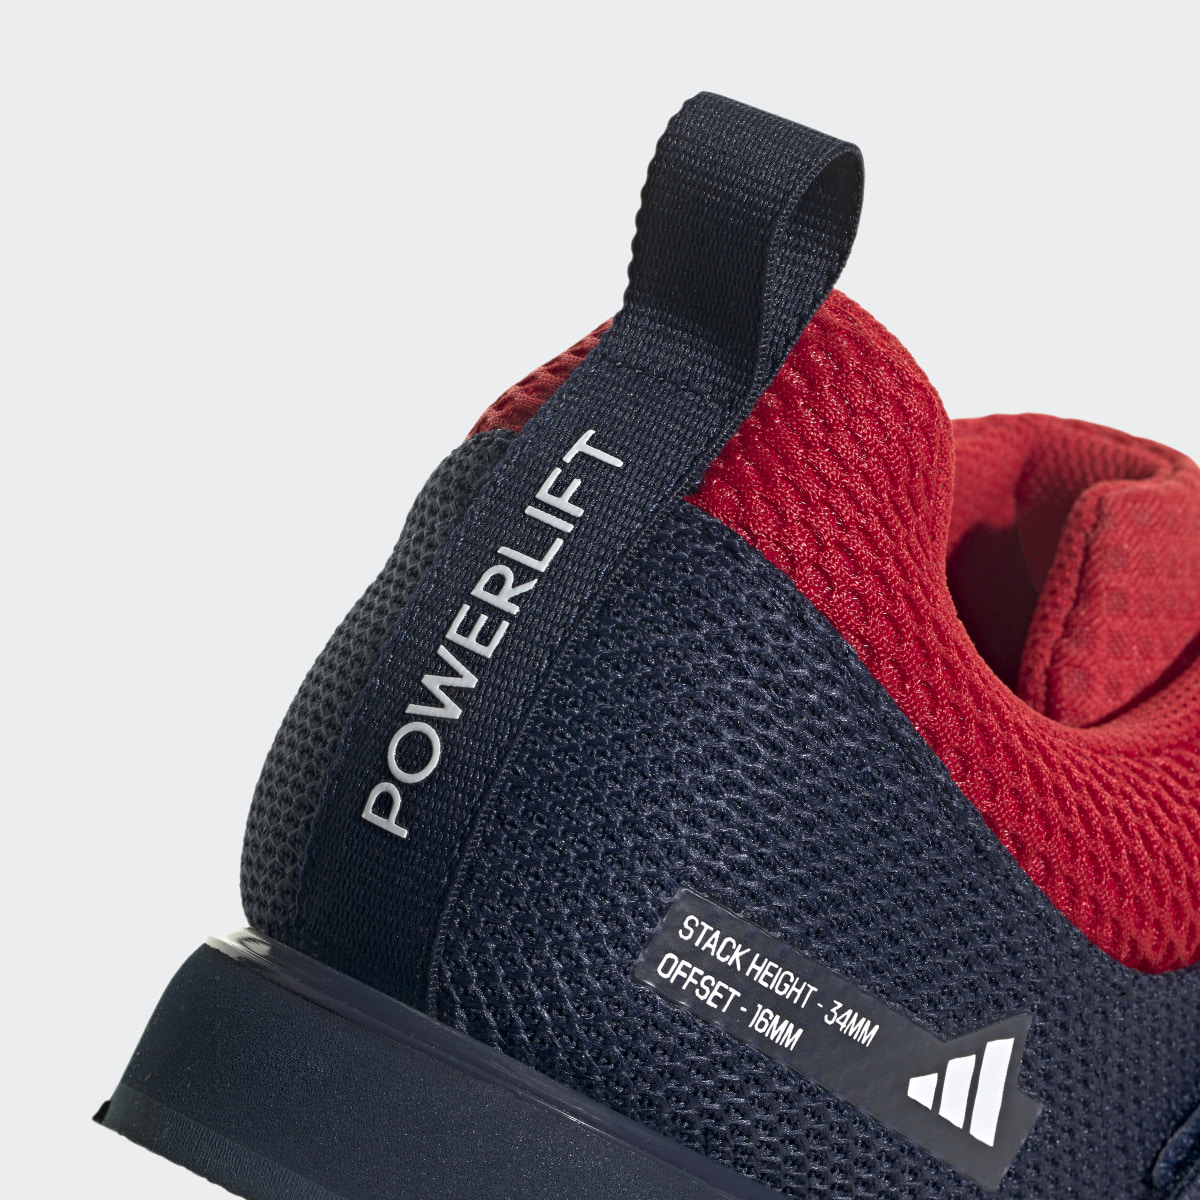 Adidas Powerlift 5 Weightlifting Shoes. 9